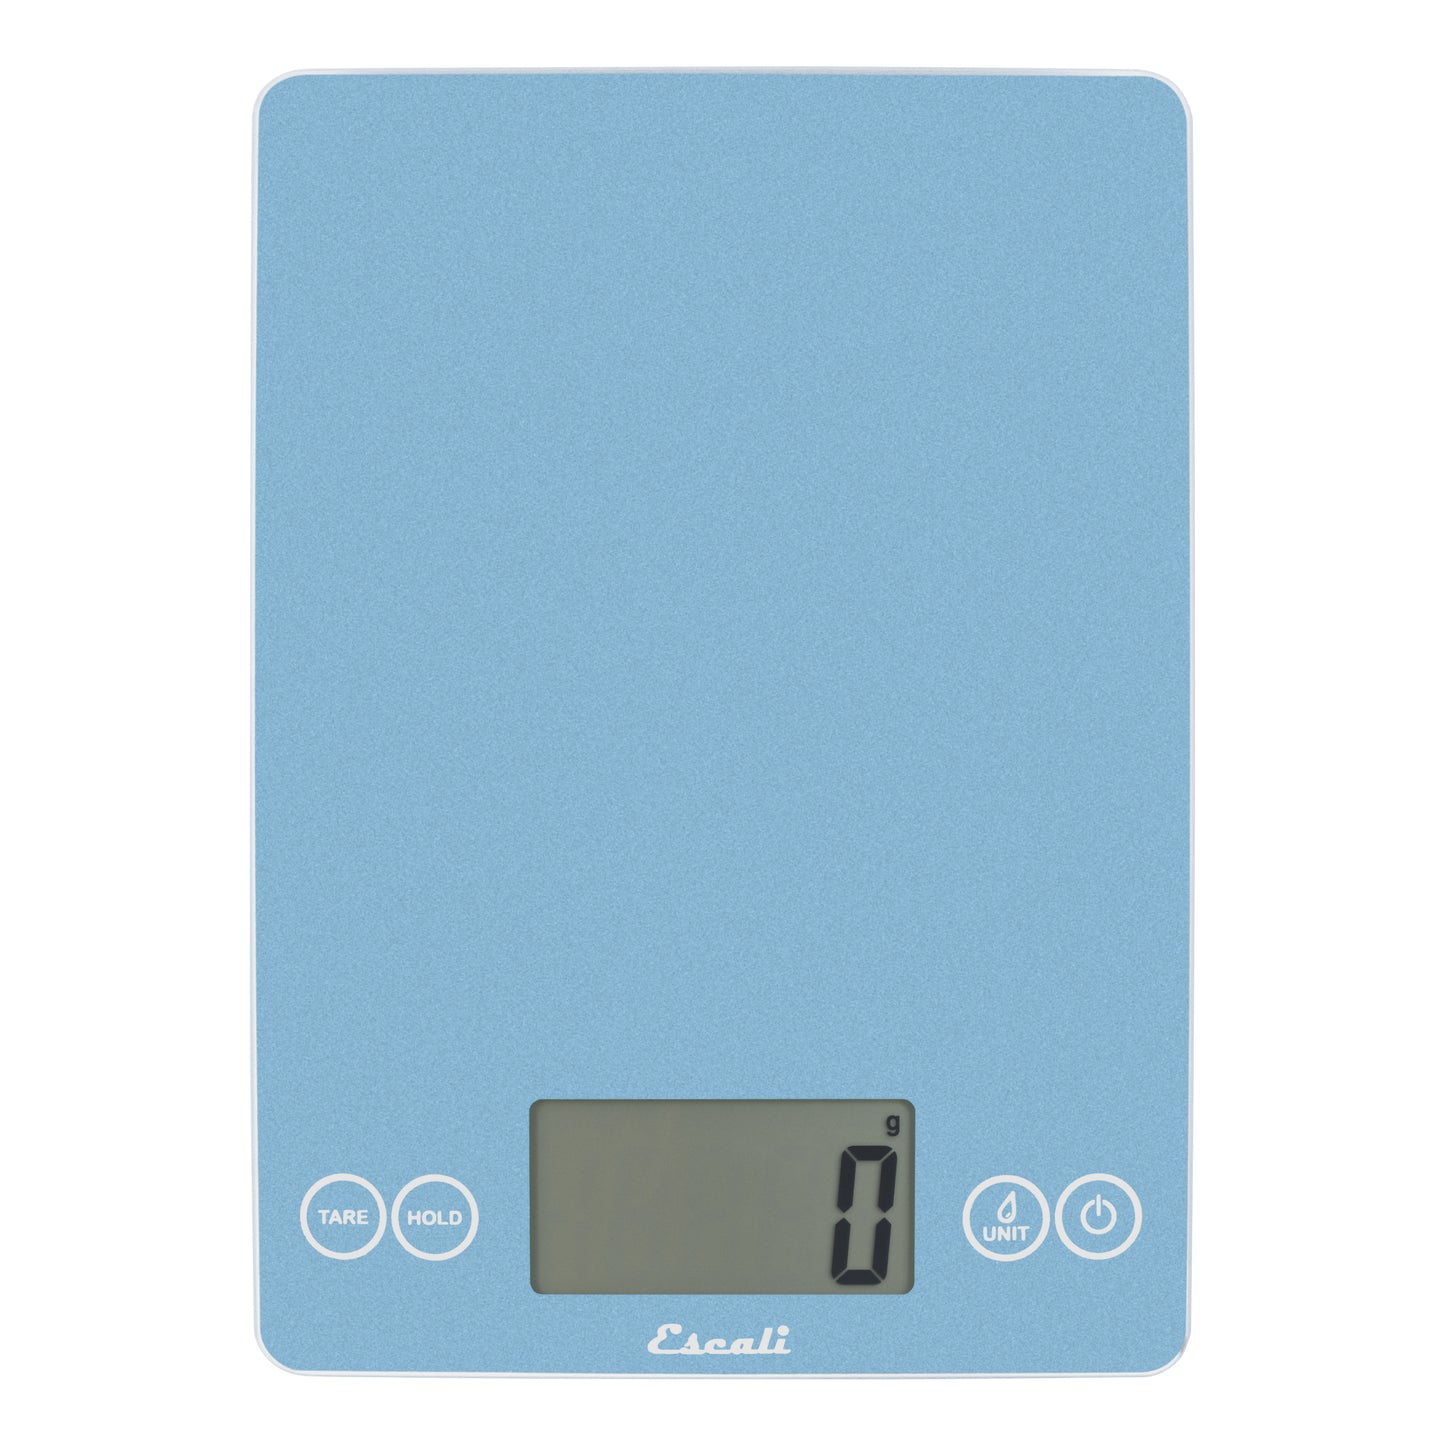 A photo of a sky blue color ARTI Digital Kitchen Scale on a white background.